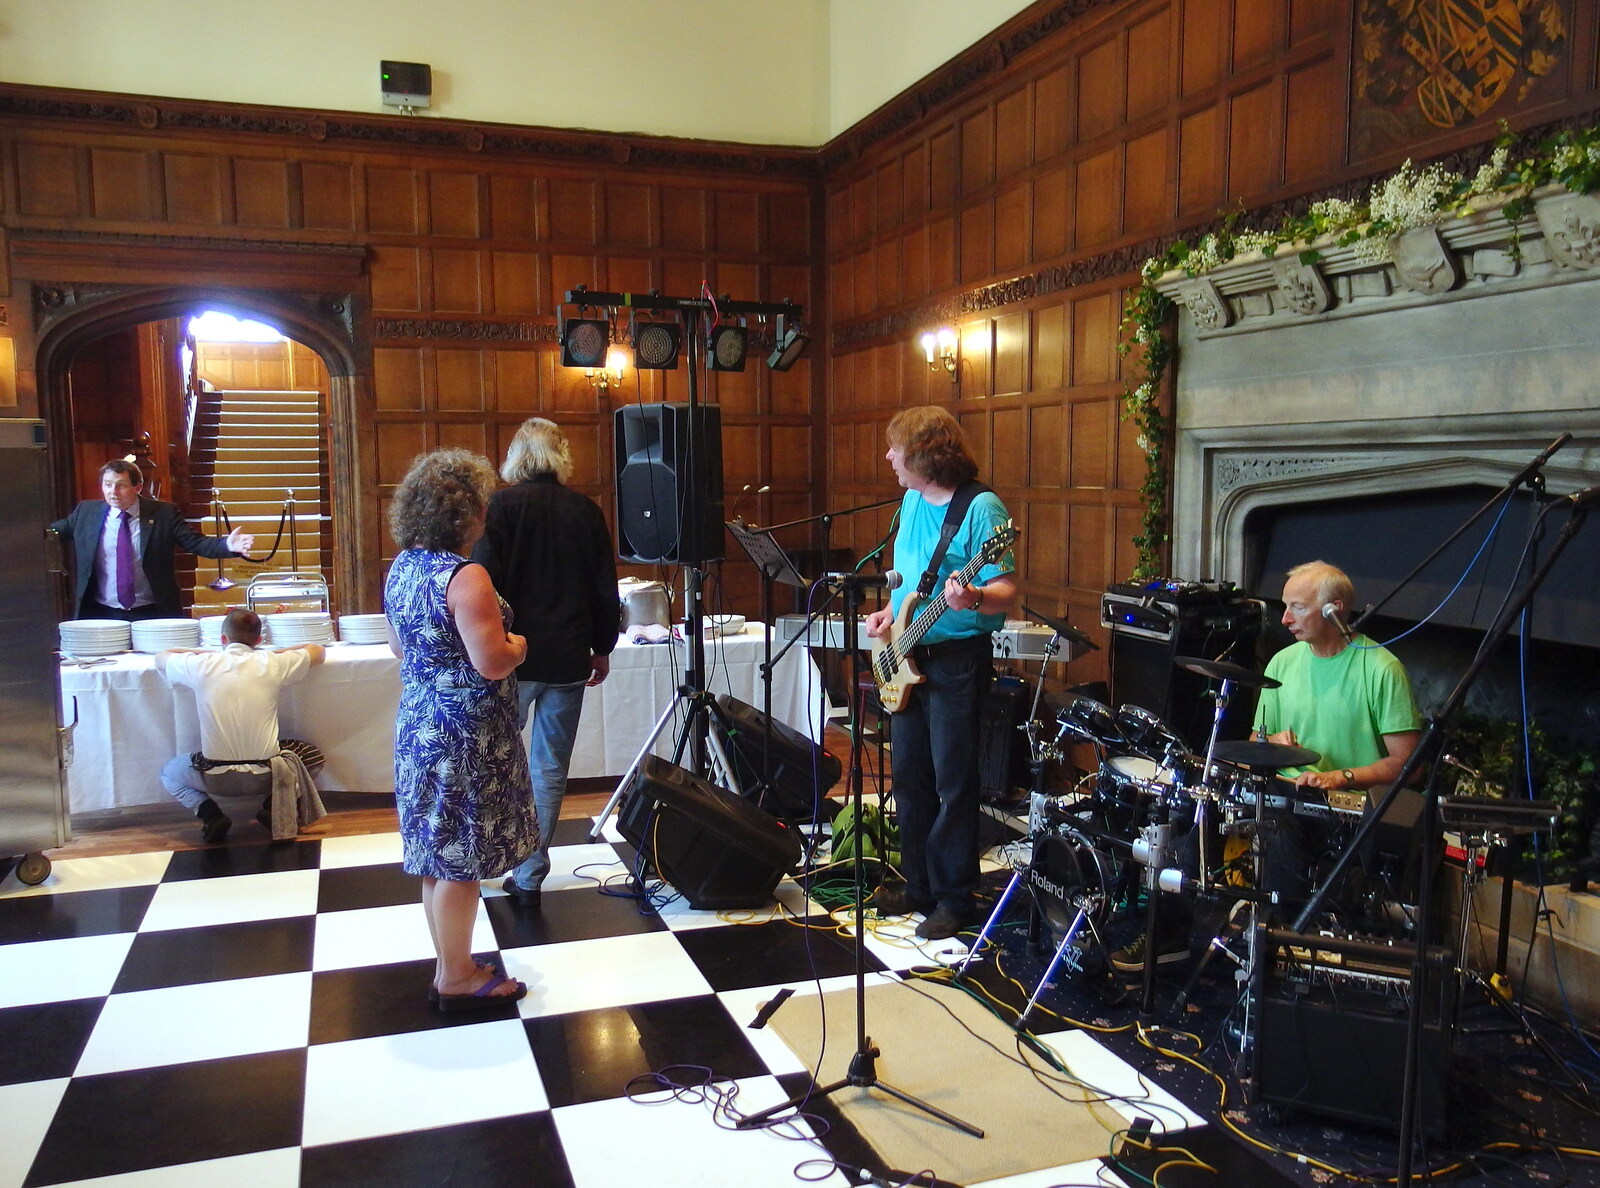 The band does some sound-checking from The BBs at Hengrave Hall, Hengrave, Suffolk - 18th August 2013